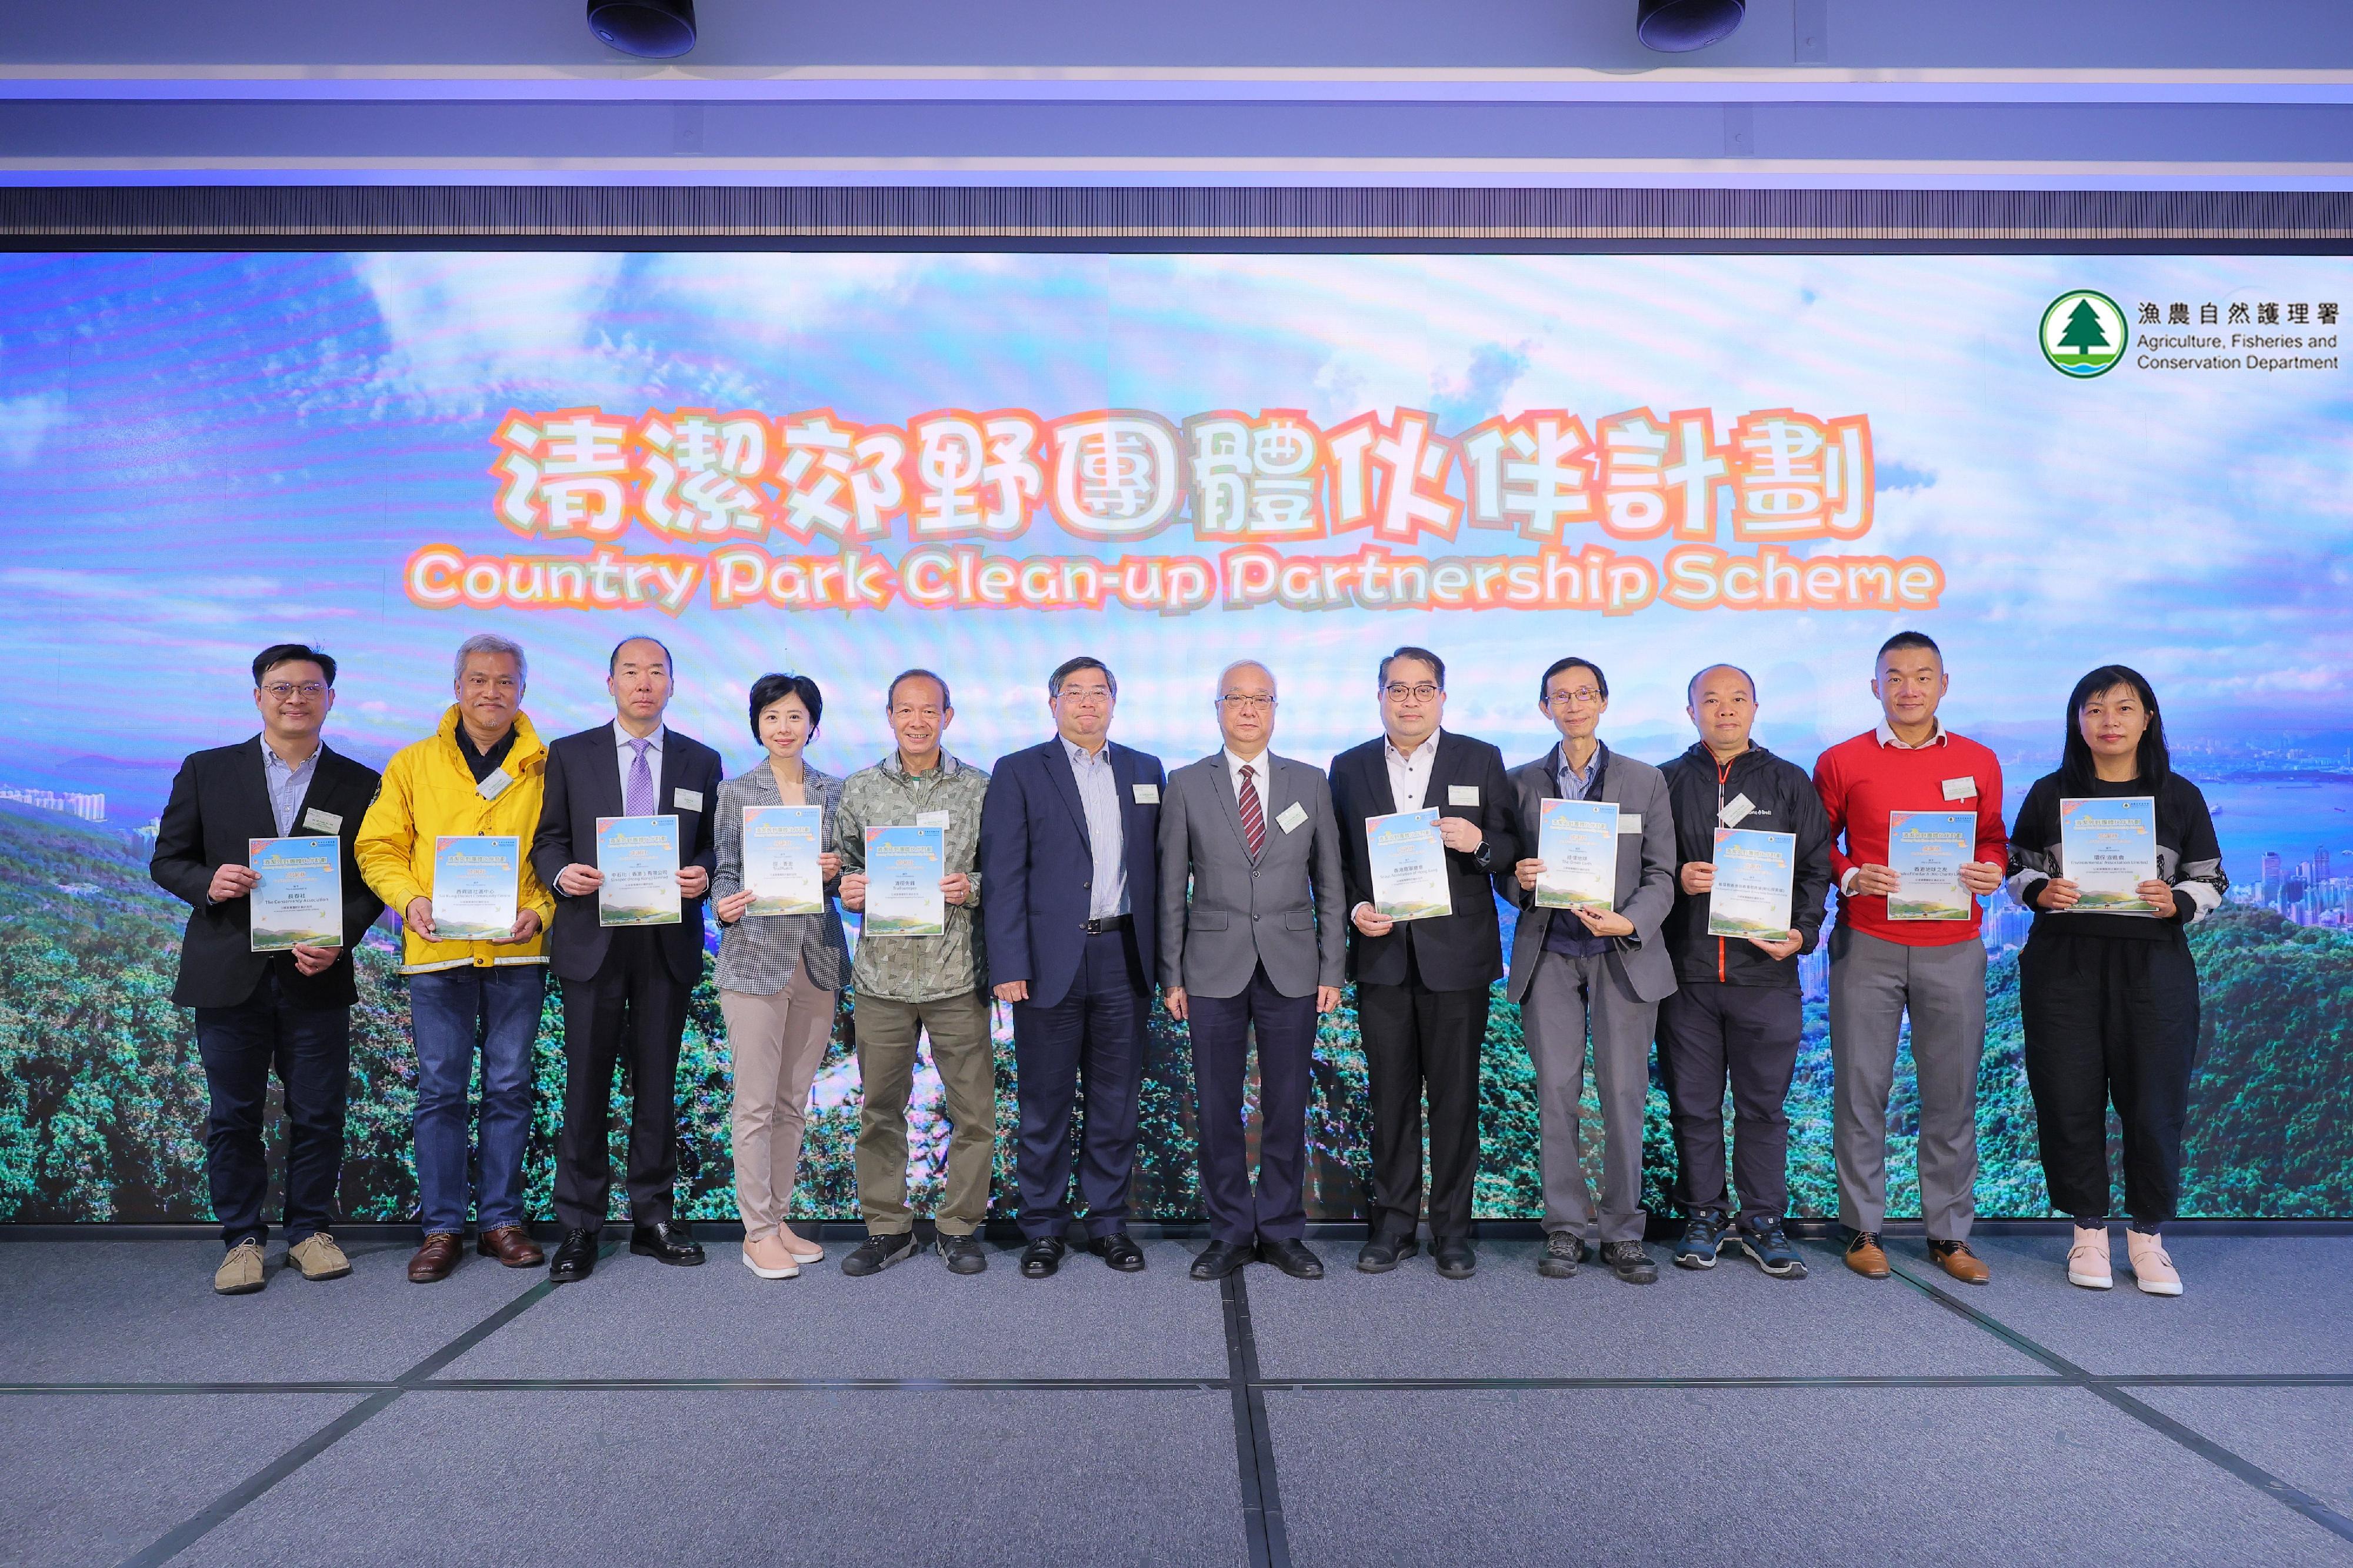 The Secretary for Environment and Ecology, Mr Tse Chin-wan (sixth right), presented certificates to volunteer groups joining the "Country Park Clean-up Partnership Scheme" at the launch ceremony held today (March 3) during the Countryside Conservation Conference 2023 as a token of appreciation for their participation in the clean-up activities in country parks.